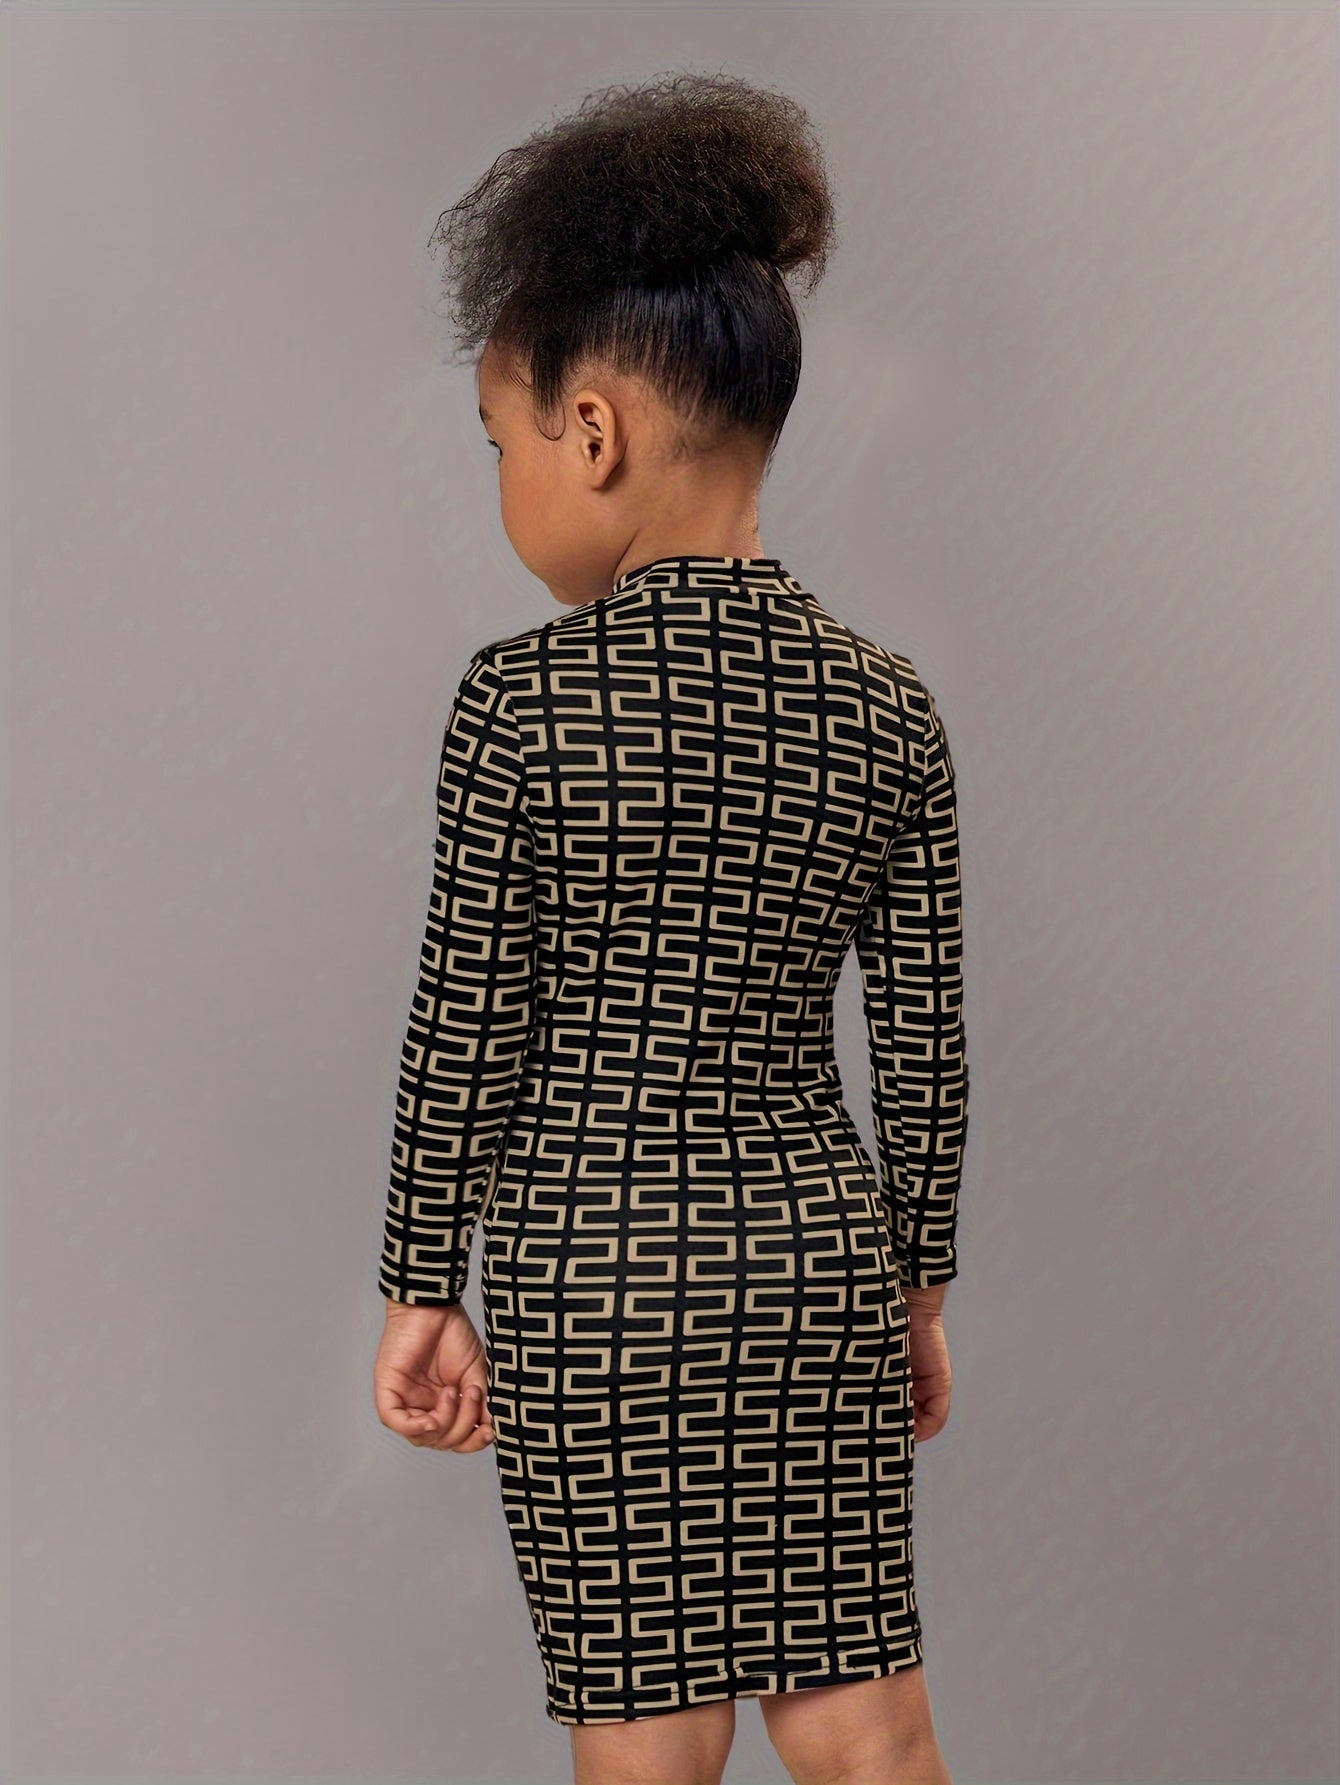 Girls Elegant Geometric Print Mock Neck Long Sleeve Bodycon Dress For 4-7 Years Old, Spring And Autumn